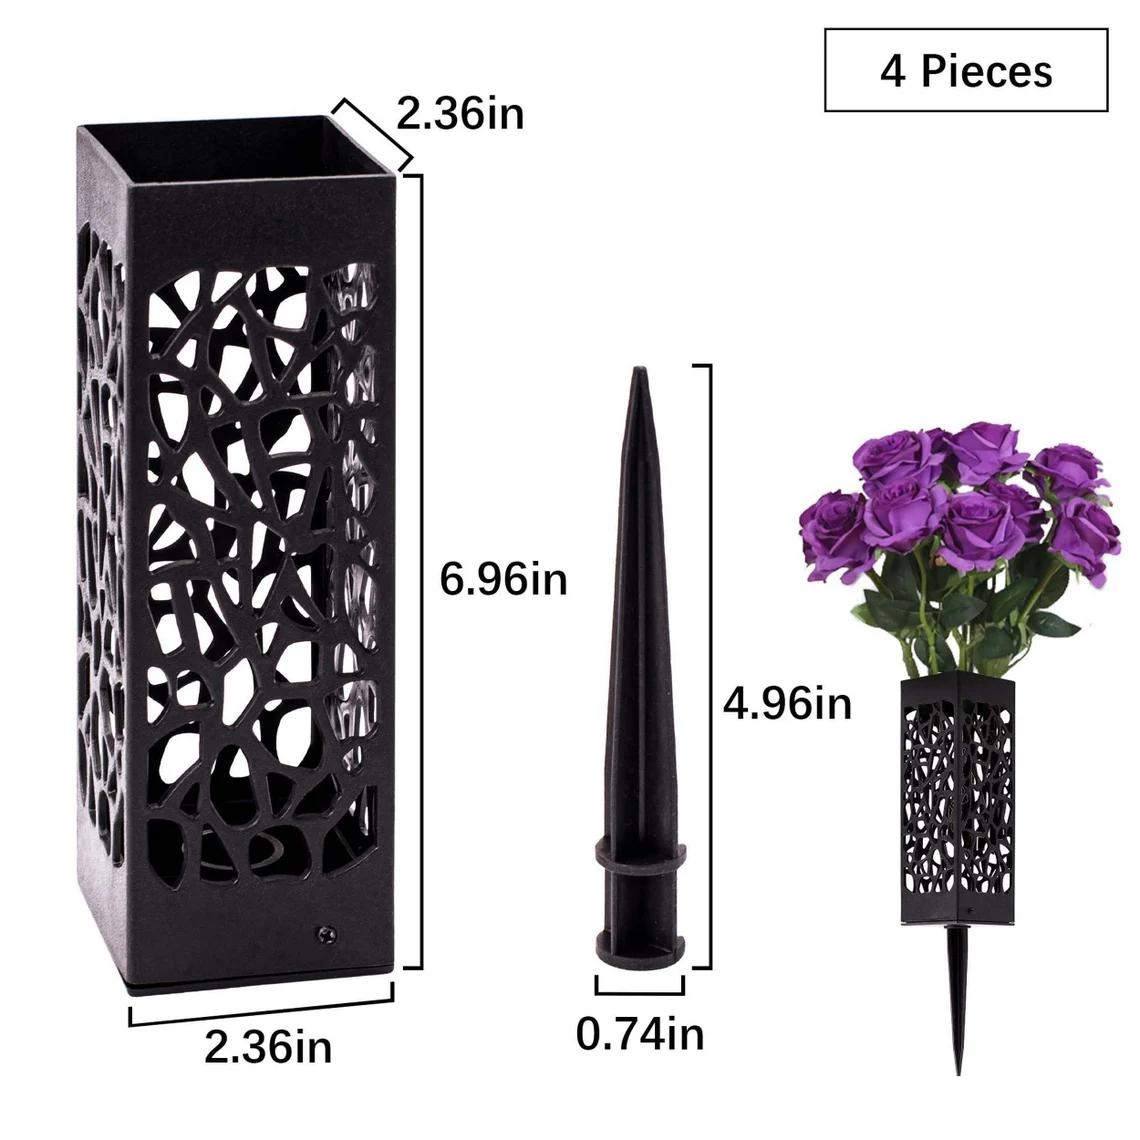 4 PCS Graves Monuments Decorations Memorial Cemetery Floral Holder Vases with Long Spike Stake